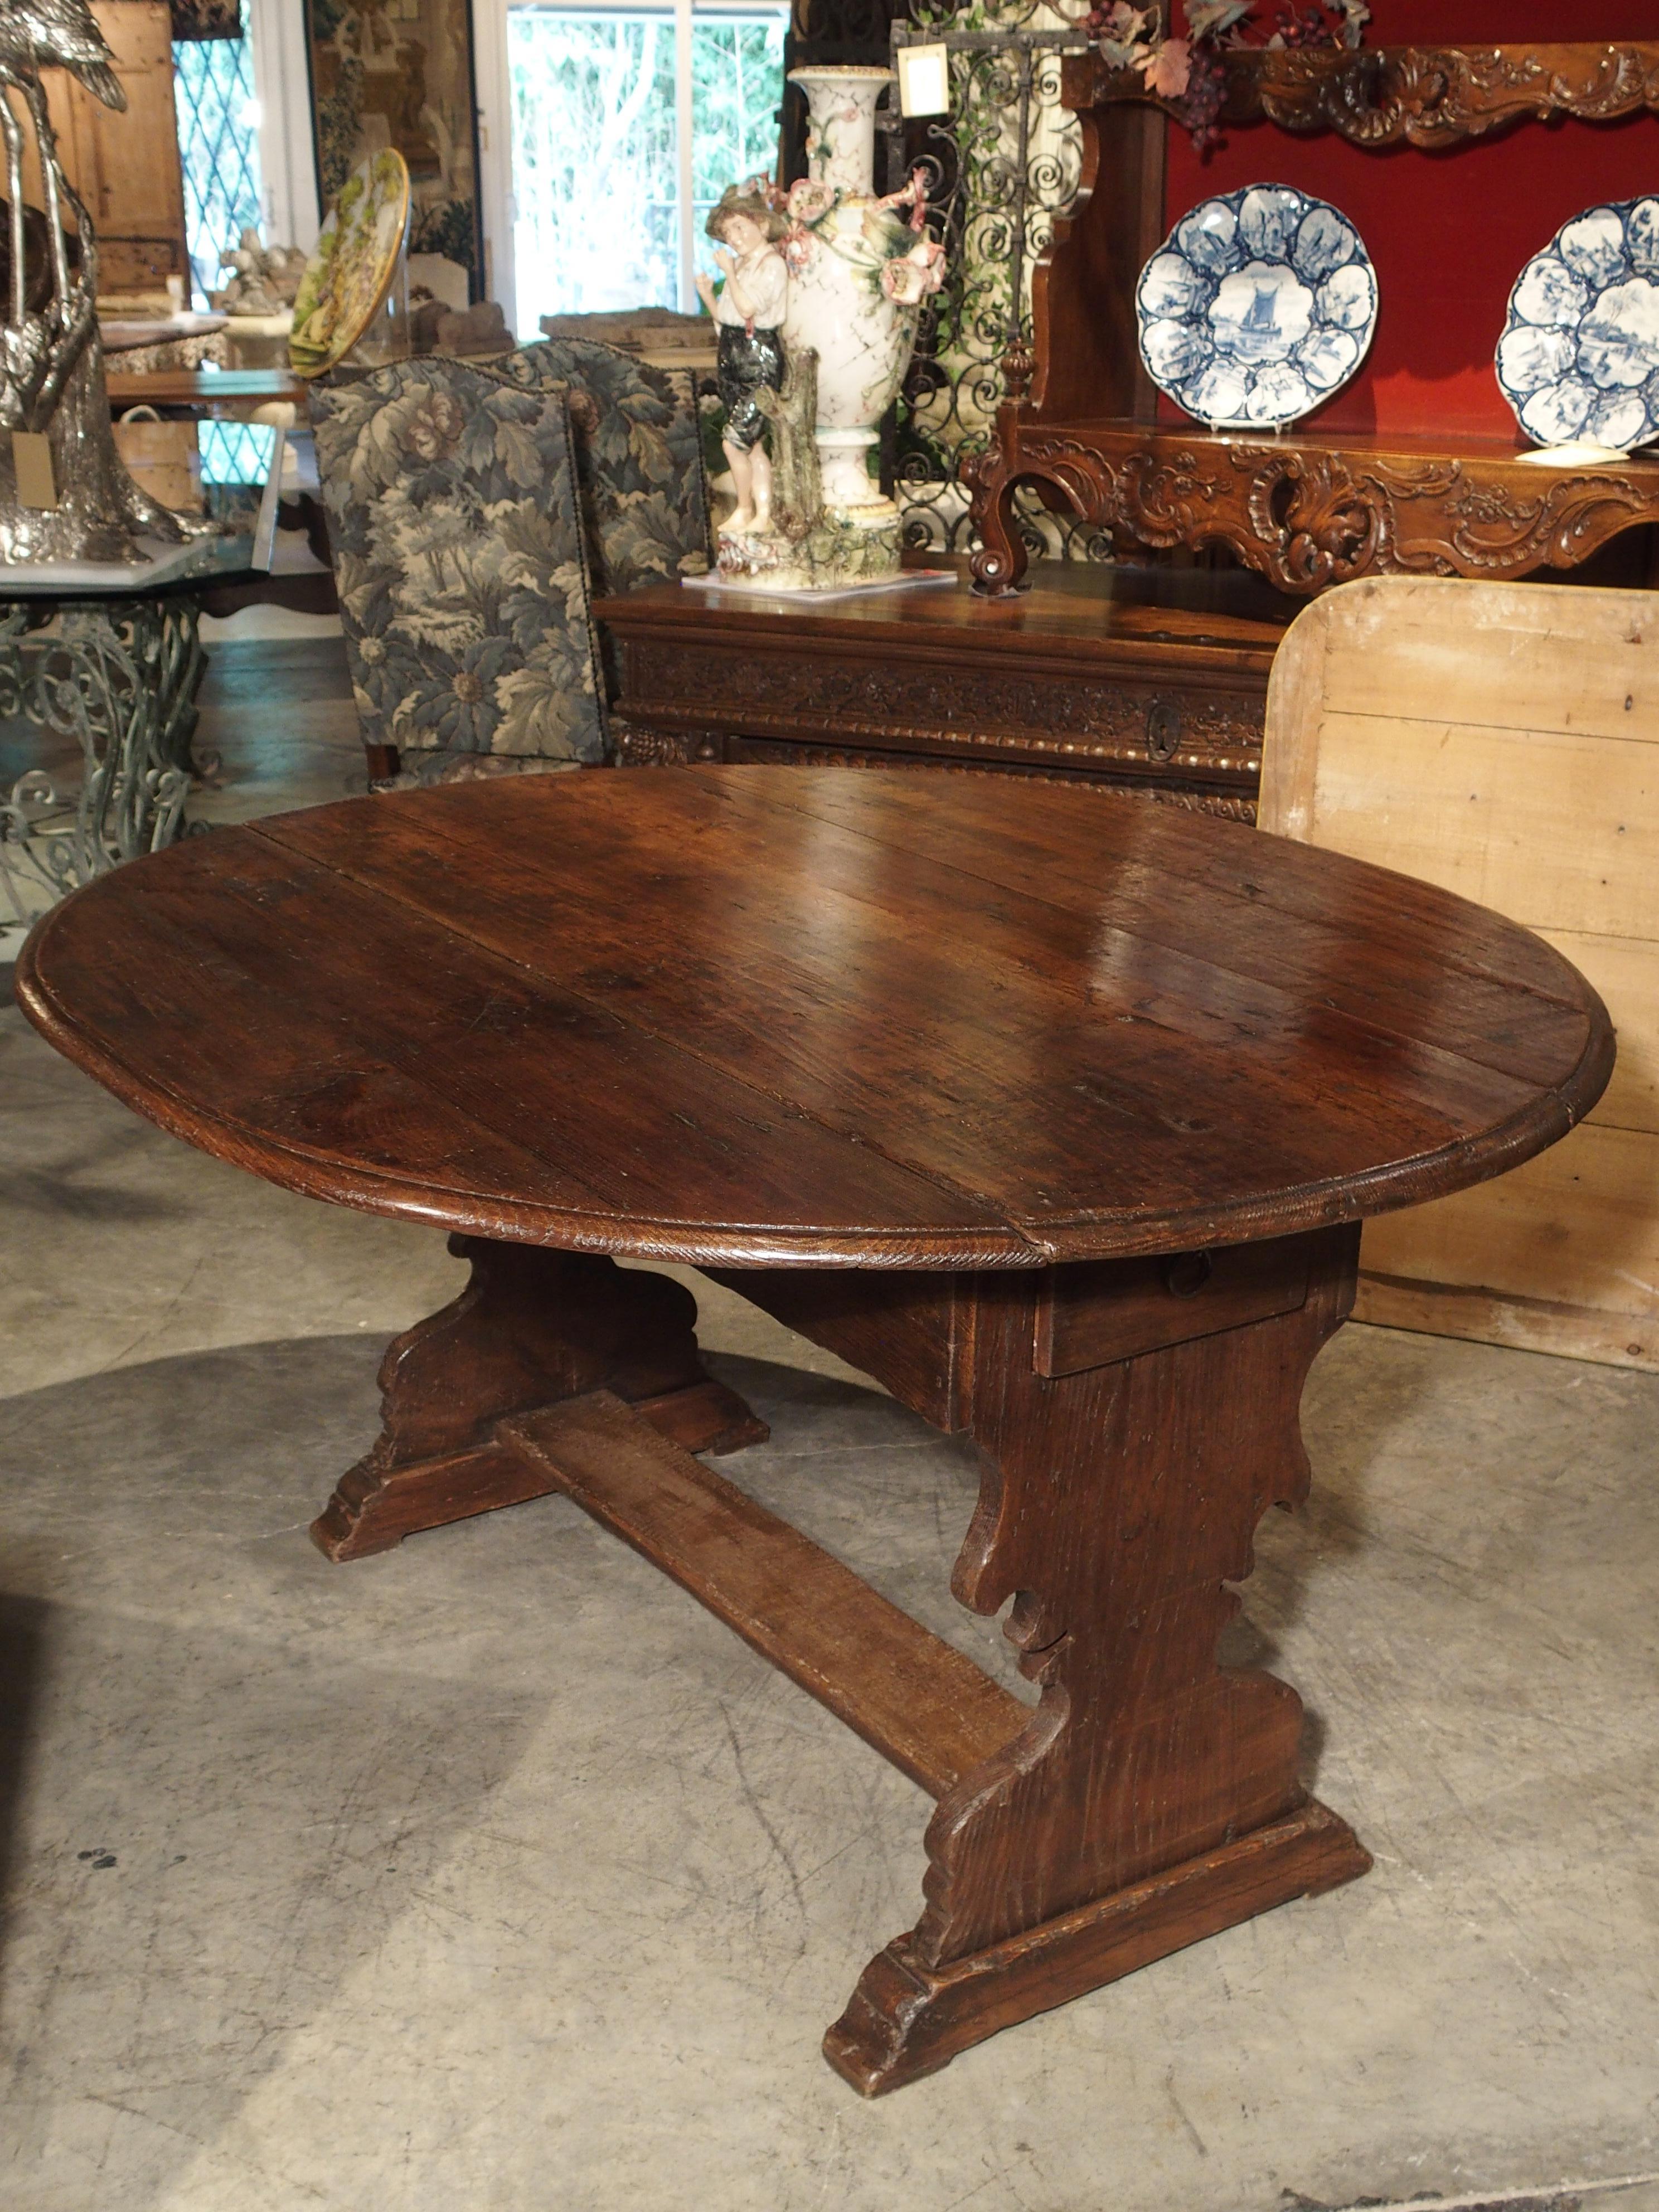 Antique Chestnut Wood Drop Leaf Table from Italy, circa 1790 8